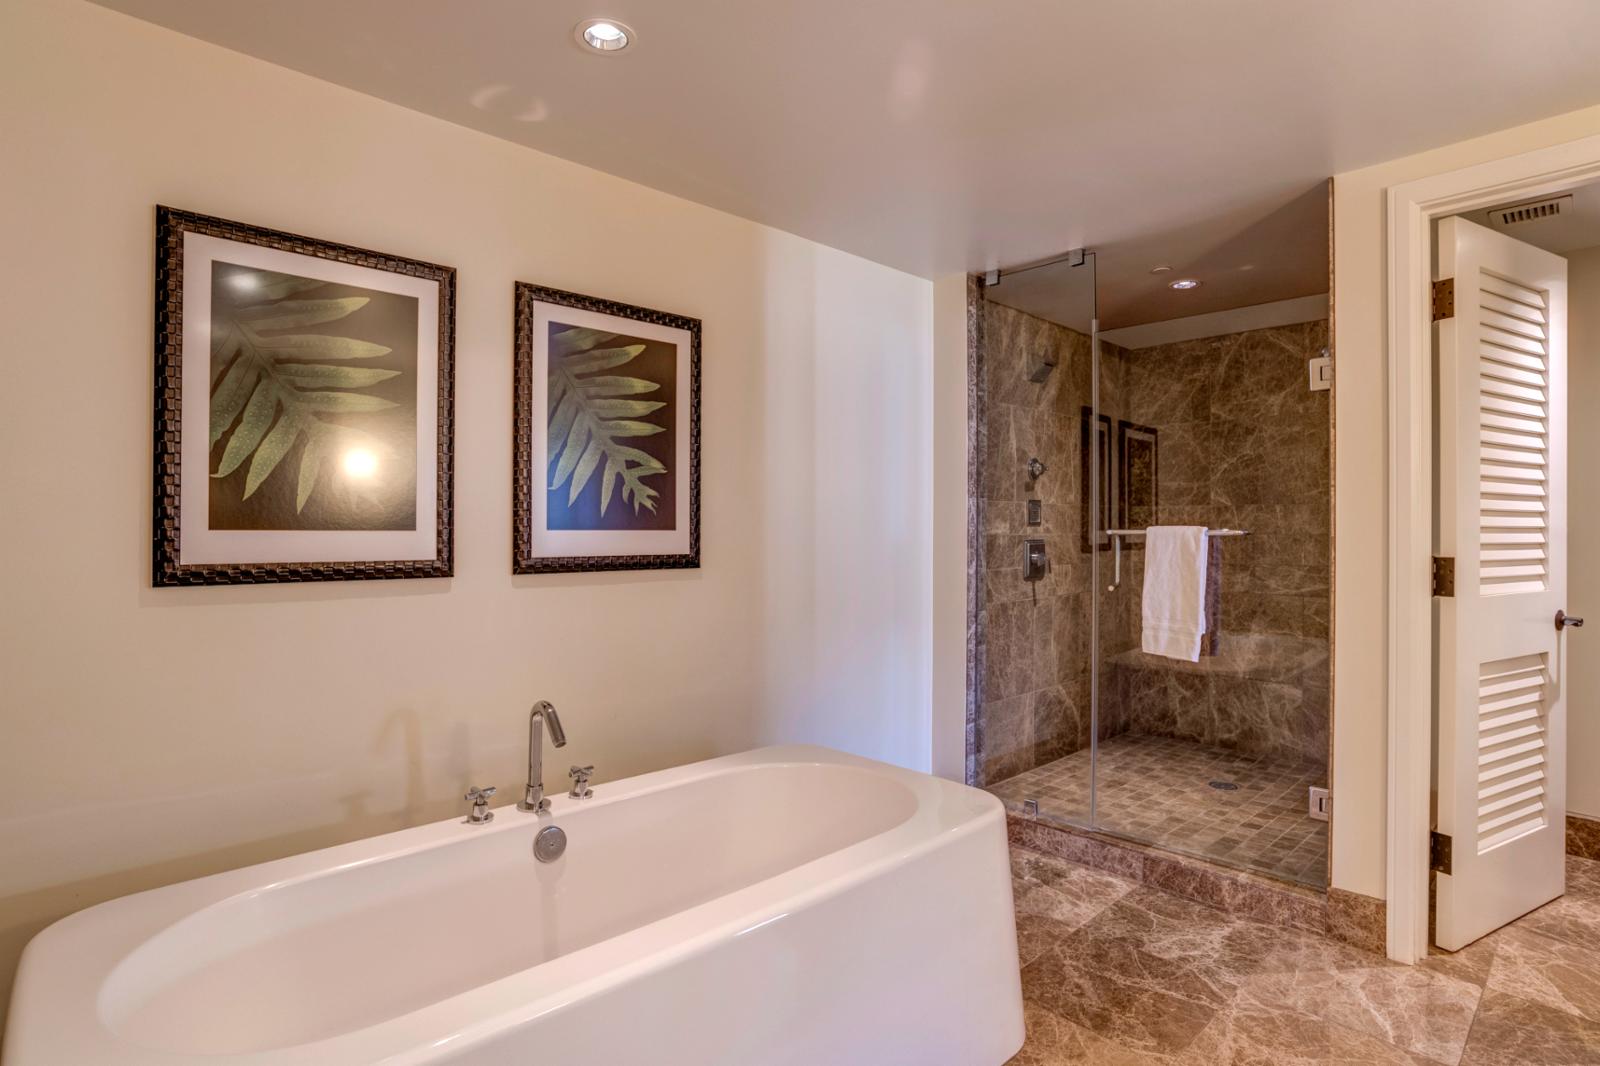 Large soaking tub for you to relax and enjoy this luxury vacation!